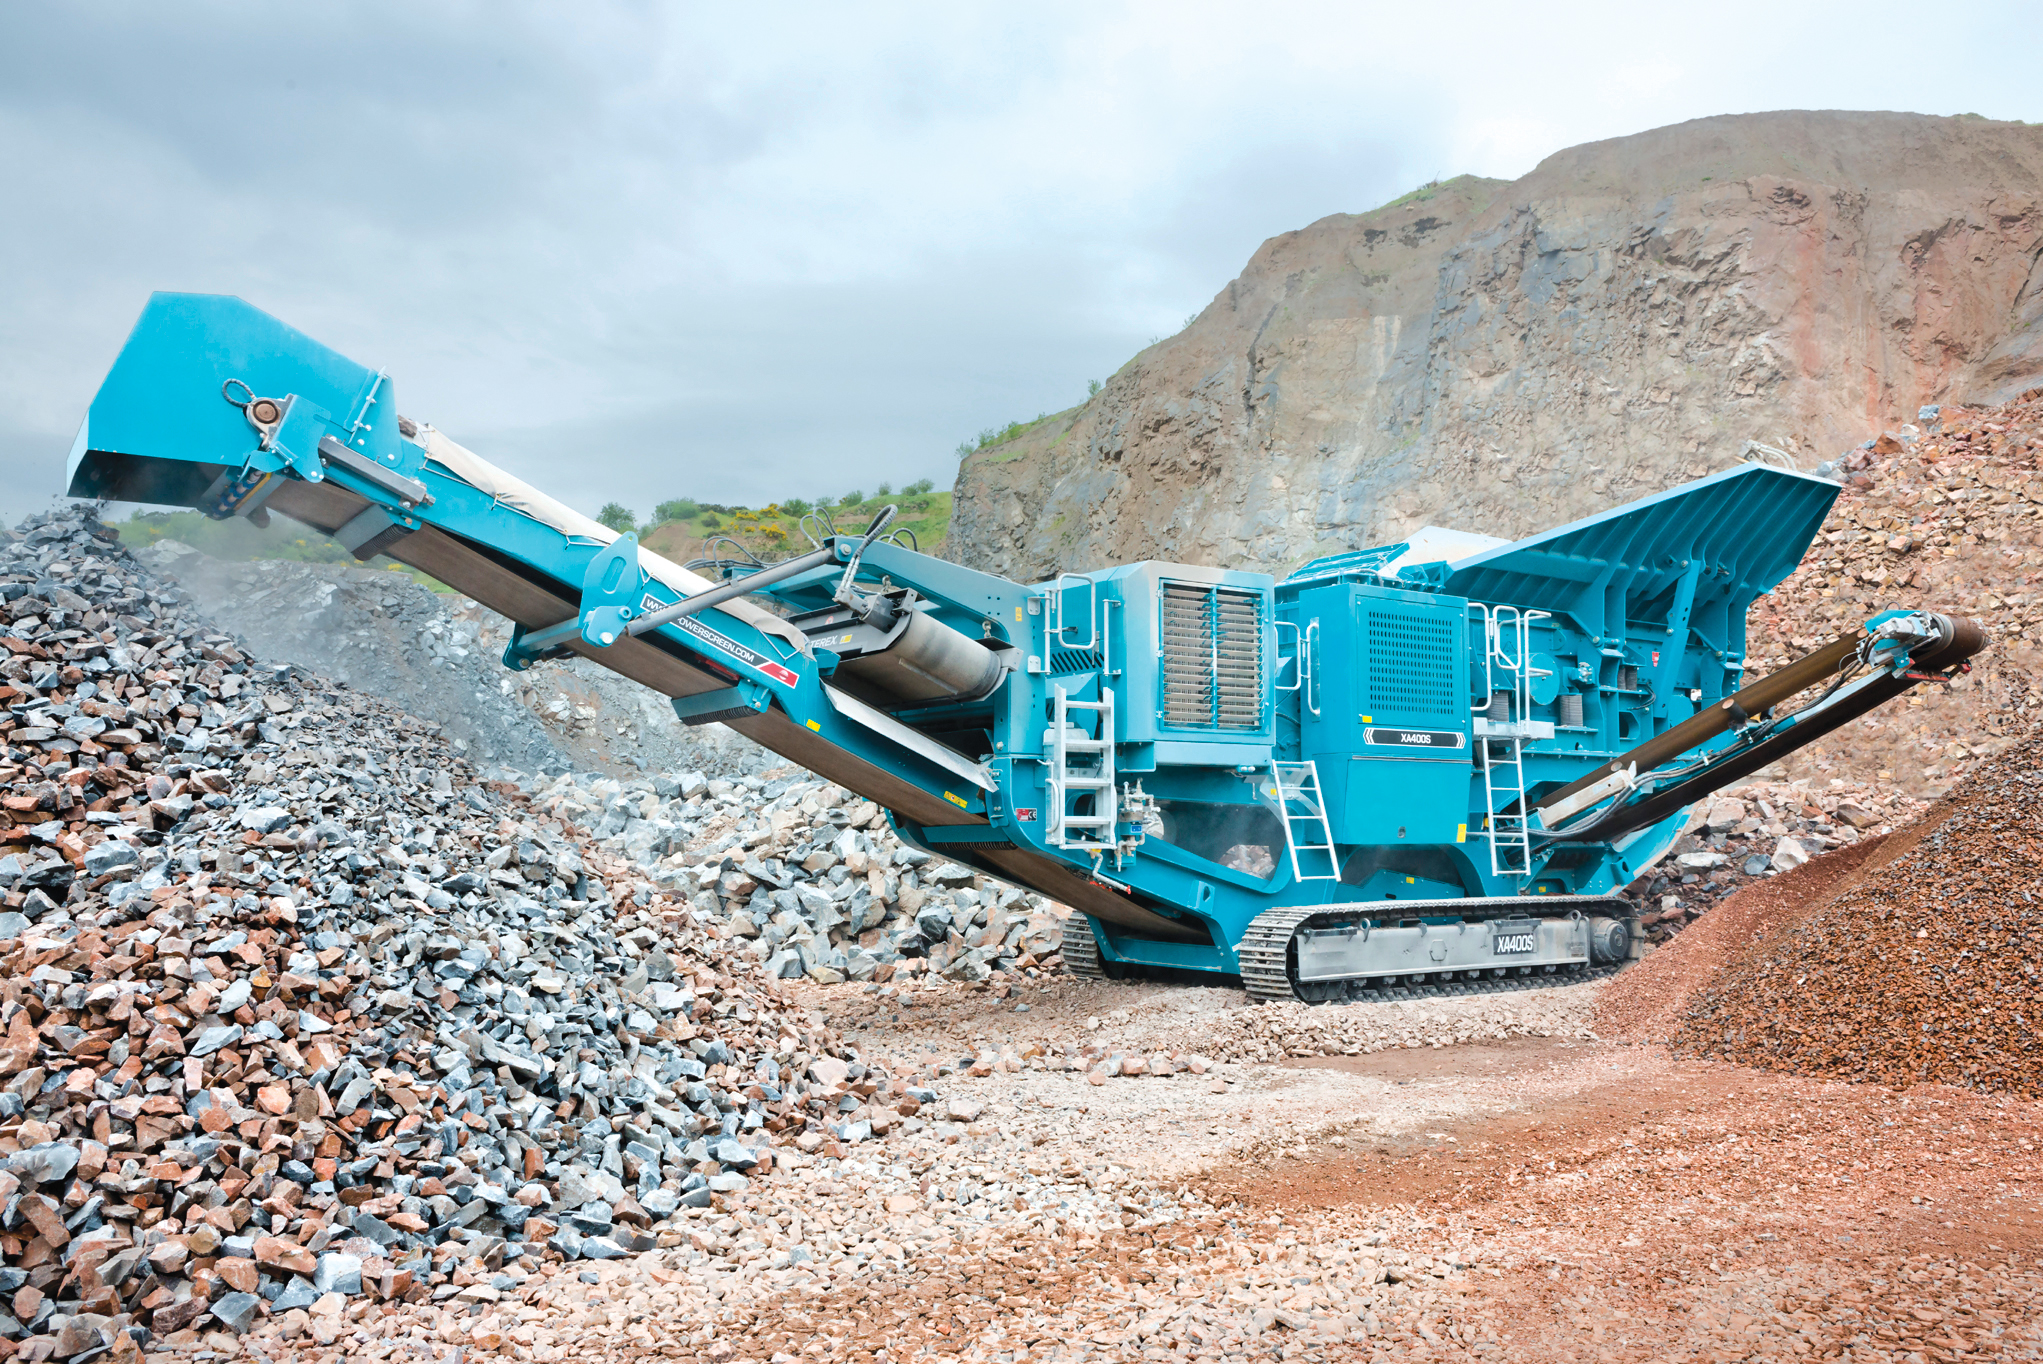 The improved X400S jaw crusher from Powerscreen